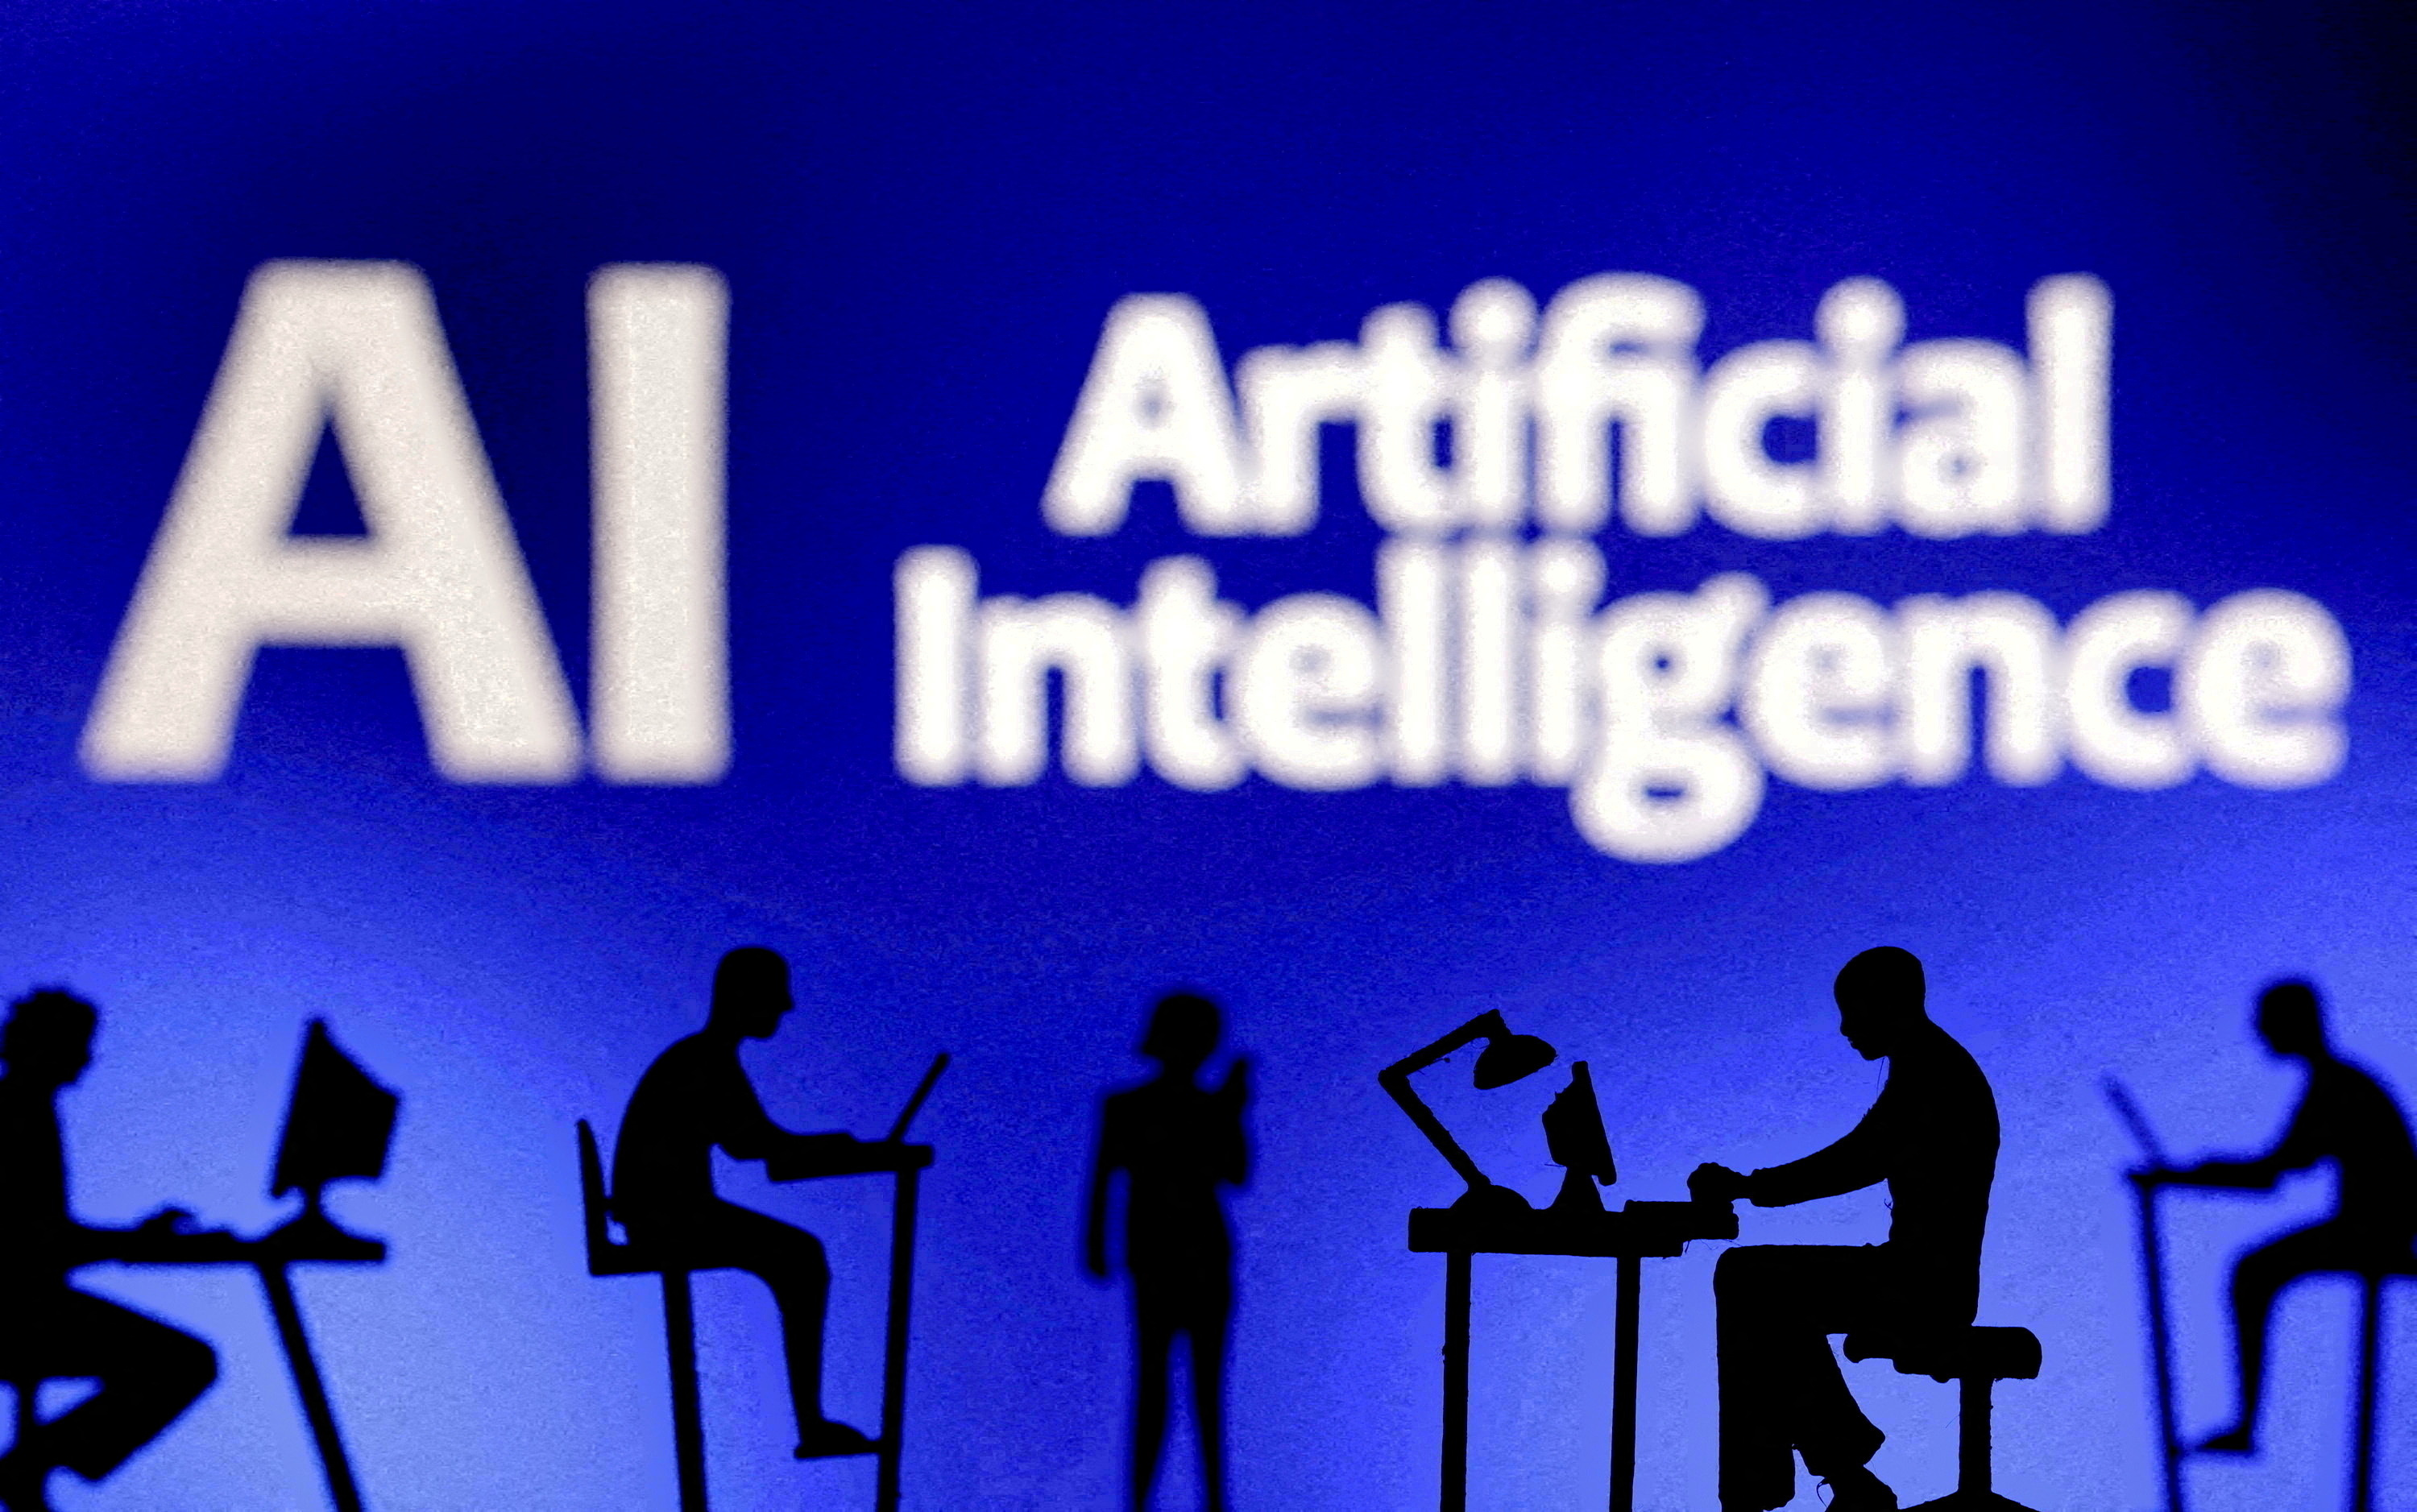 FILE PHOTO: Illustration shows words "Artificial Intelligence AI\